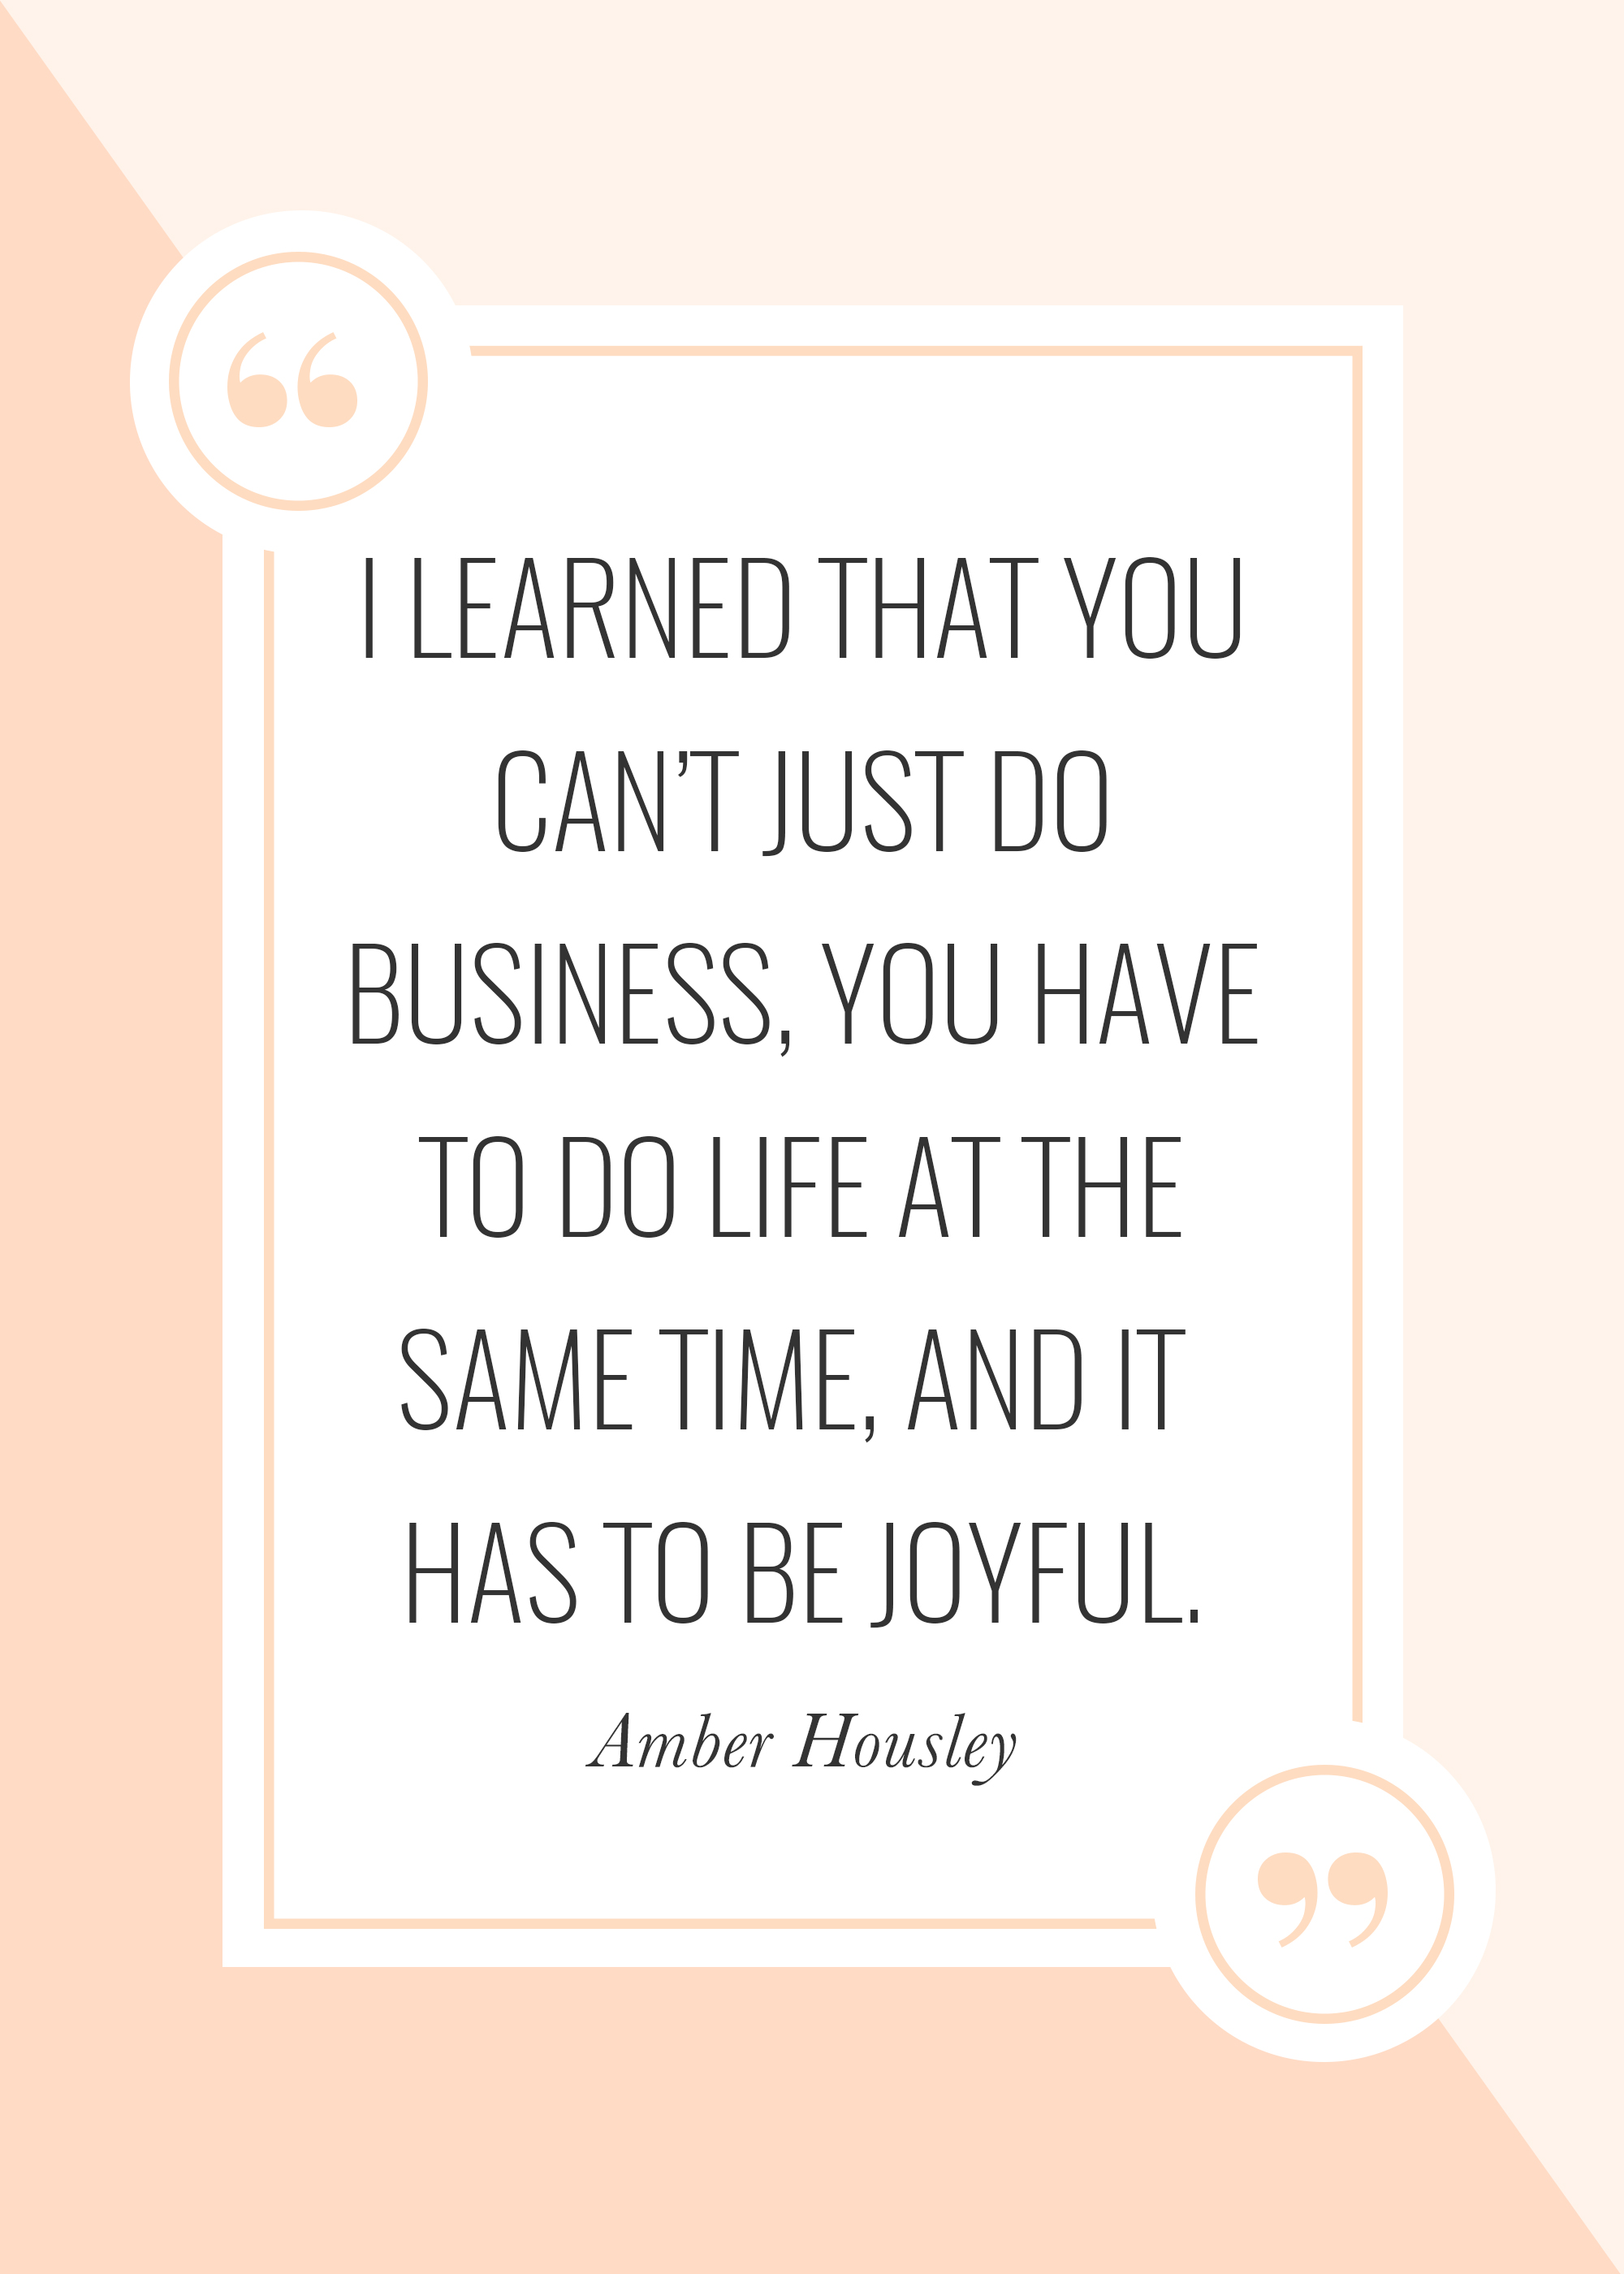 I learned that you can't just do business, you have to do life at the same time, and it has to be joyful. -- Amber Housley on The Power in Purpose Podcast